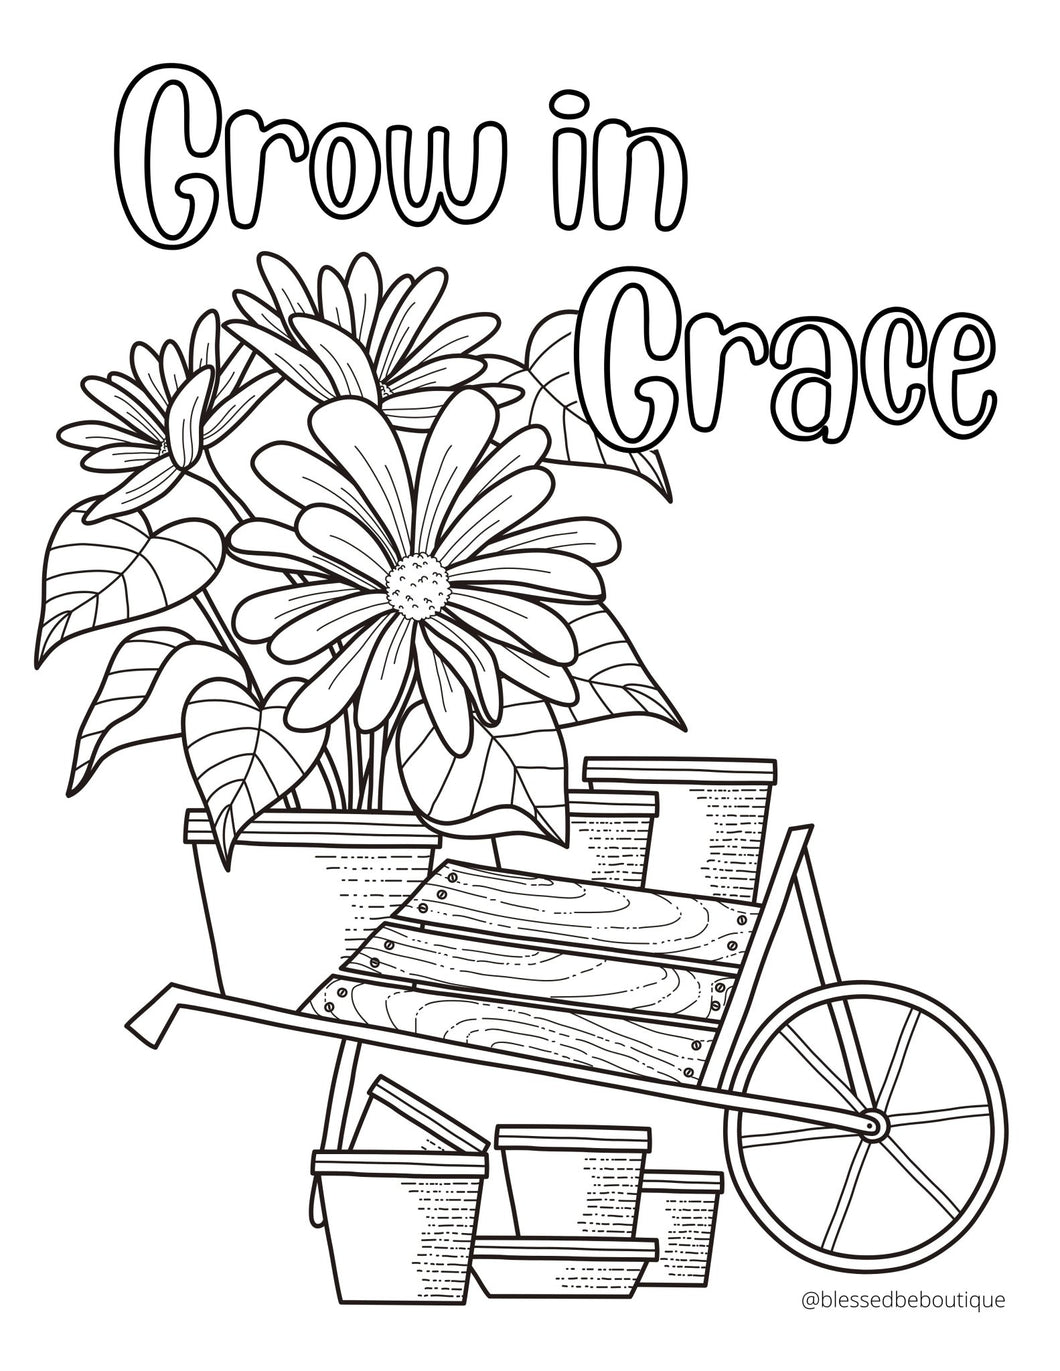 Grow in Grace - Blessed Be Boutique